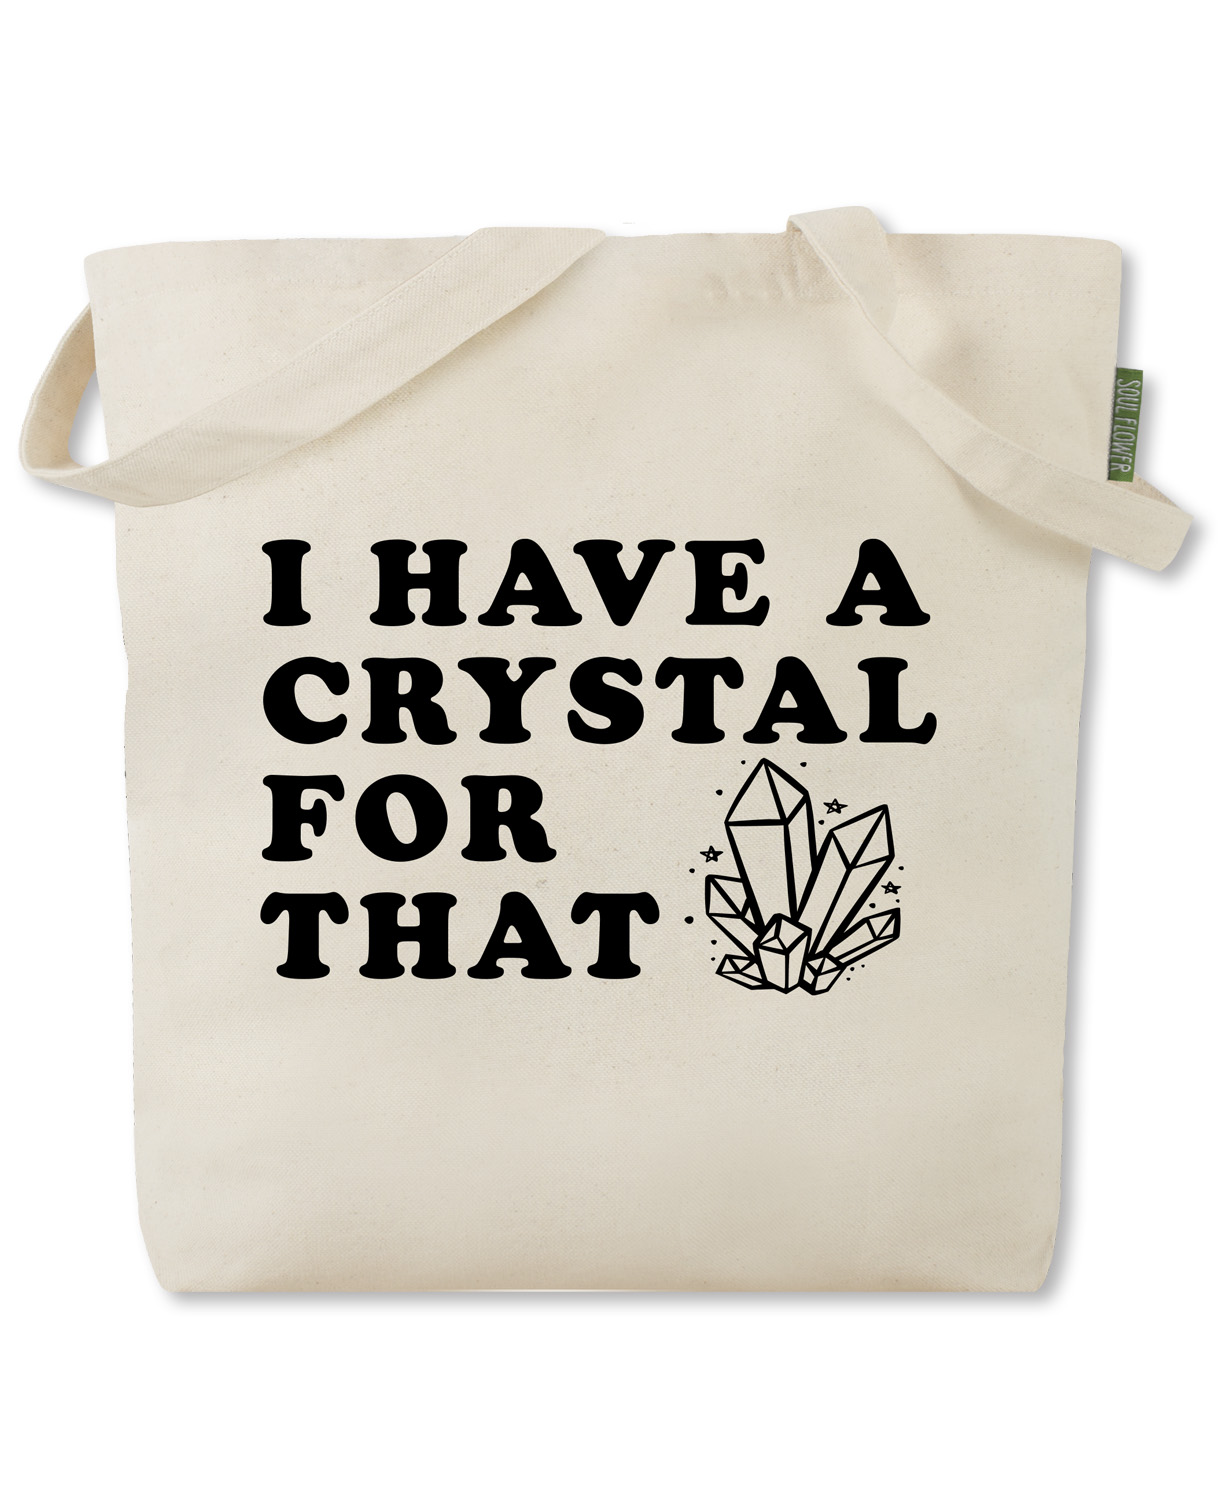 NEW! I Have A Crystal For That Tote Bag